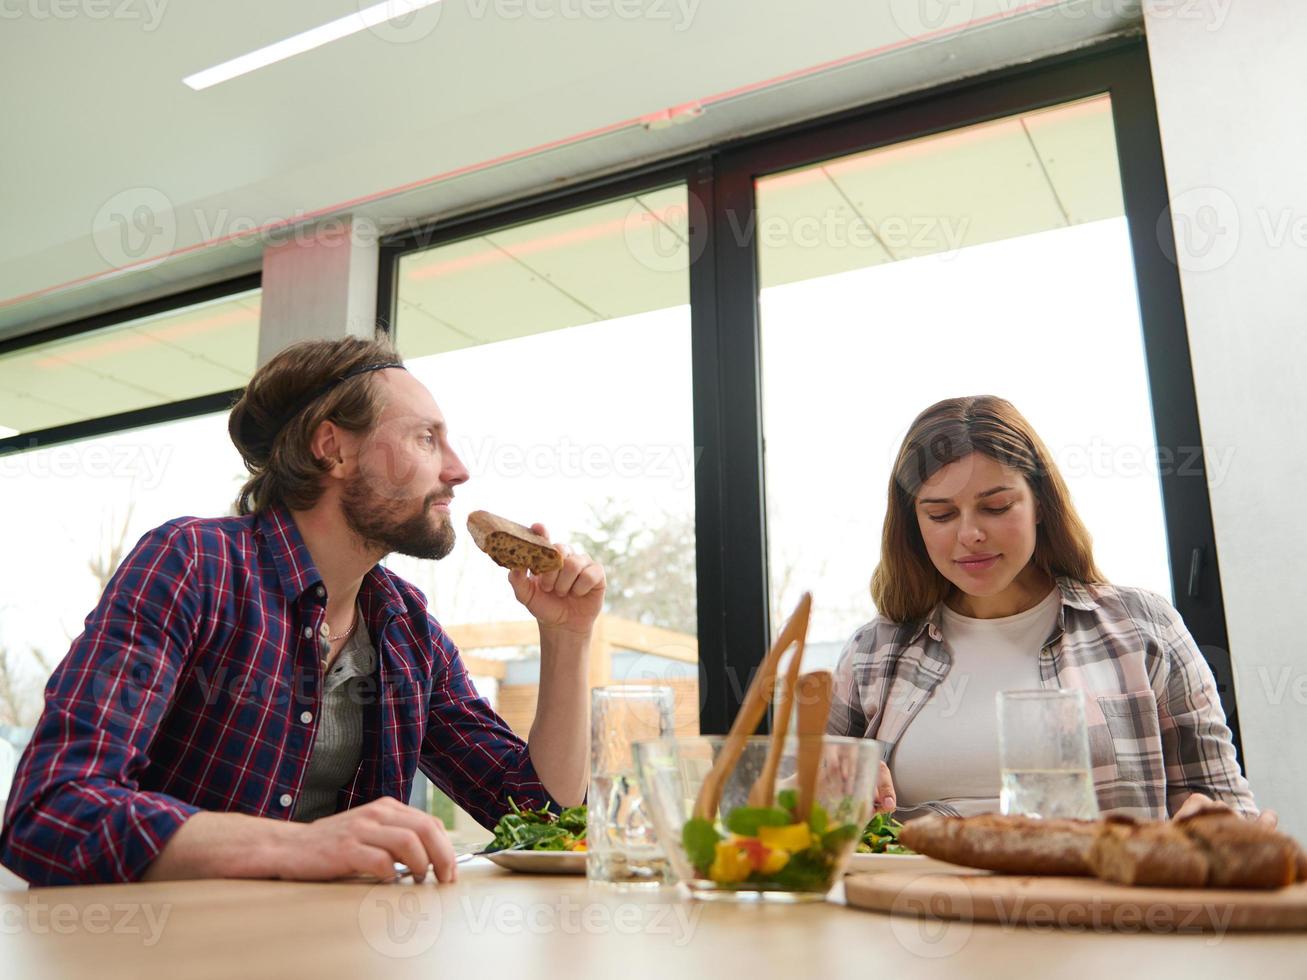 Handsome Caucasian man and woman, husband and wife, beautiful couple having fun talking at home over a delicious lunch sitting at table against windows overlooking the garden photo